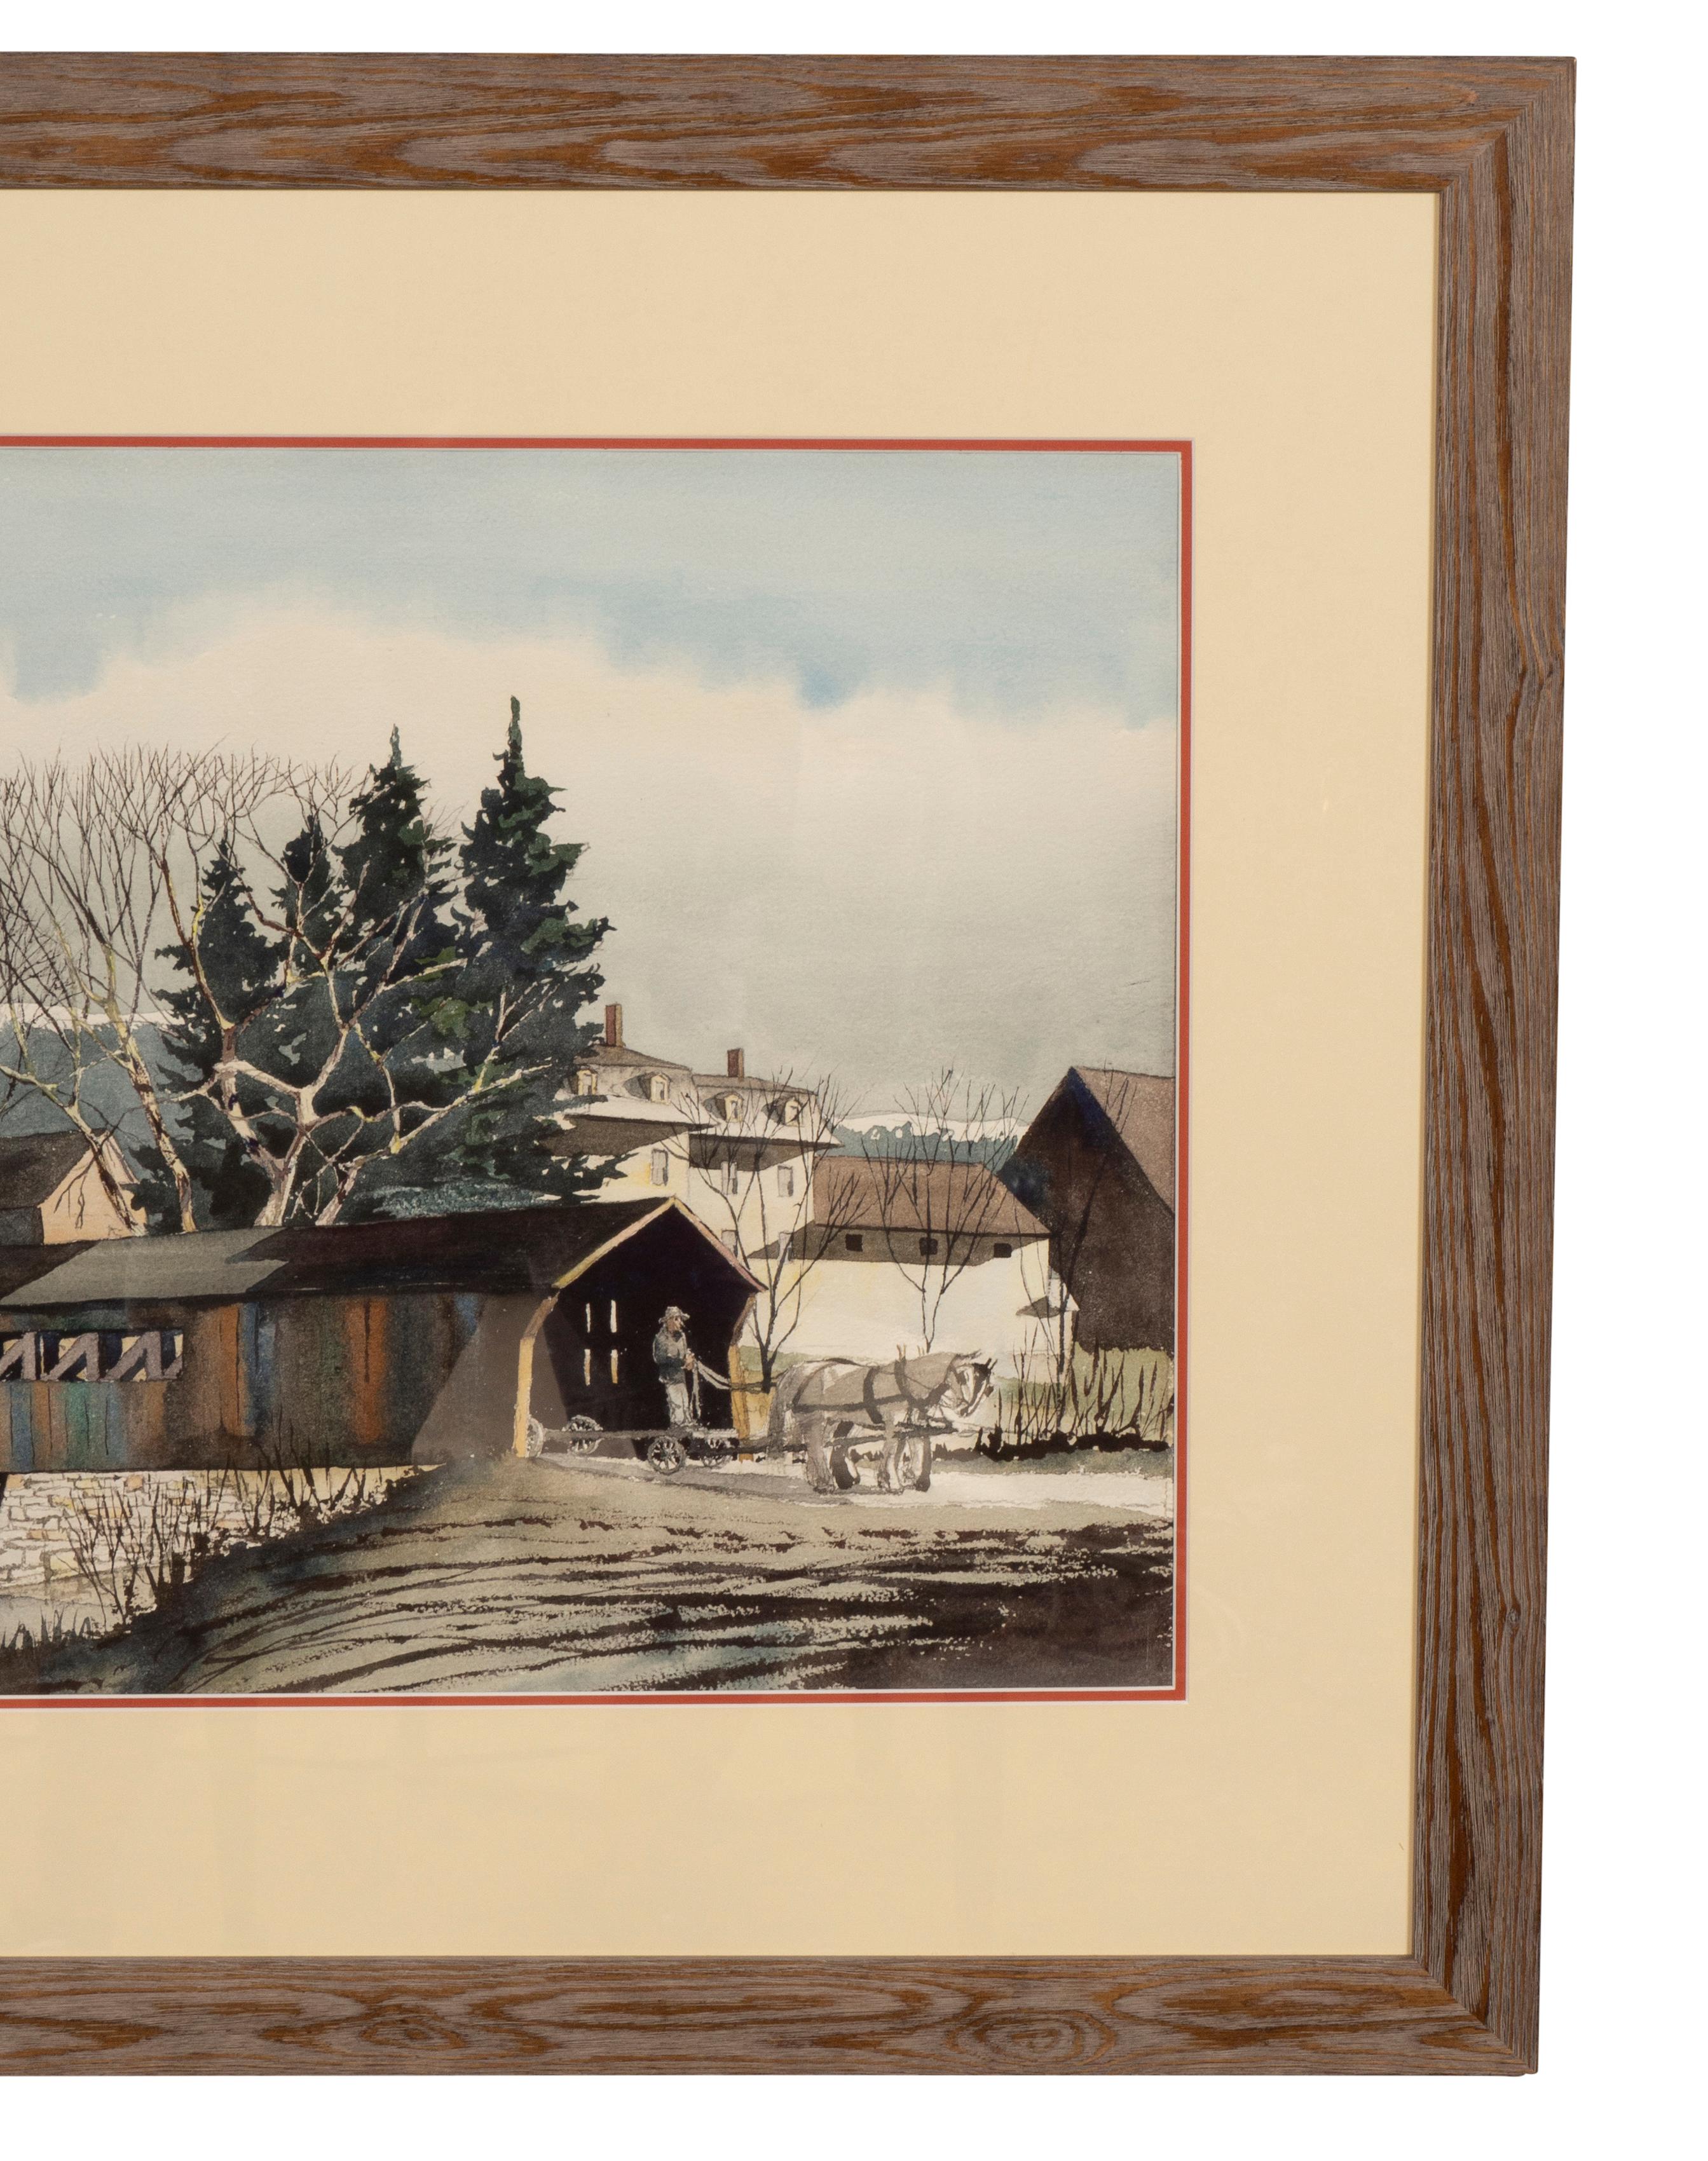 Glass Framed Watercolor Of A Covered Bridge In Moscow Vermont By Walton Blodgett